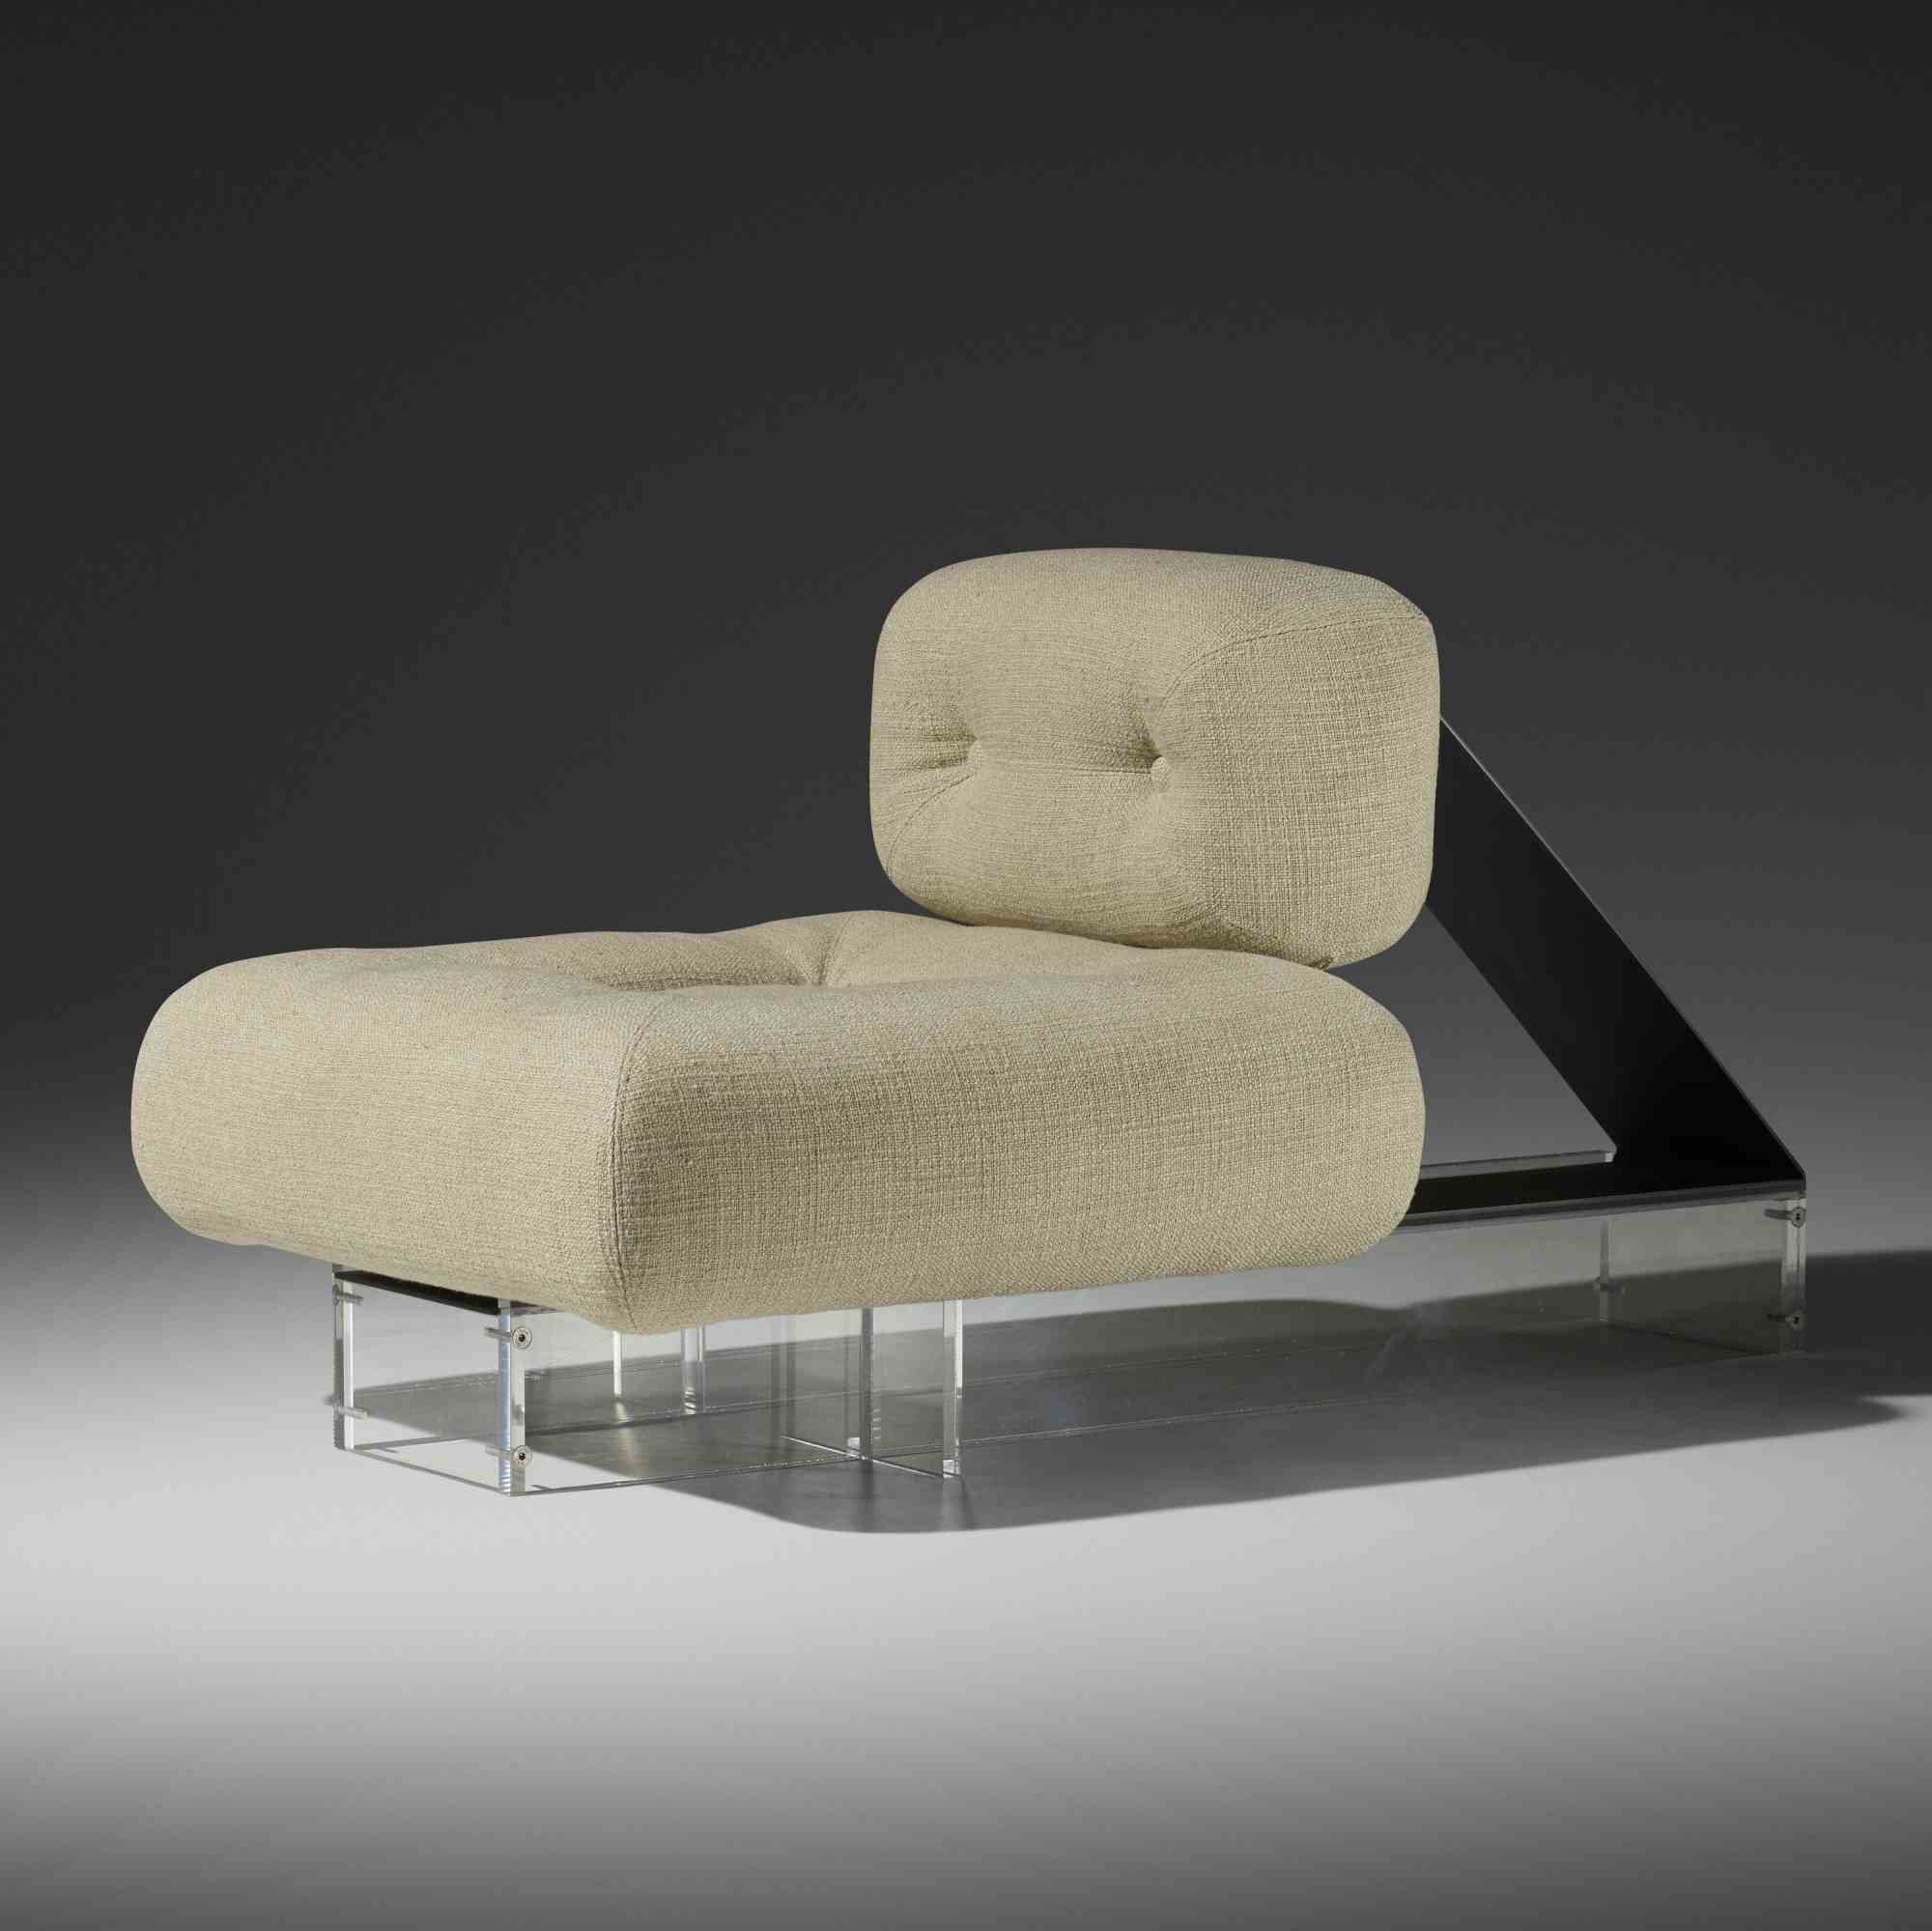 Top rare lounge chair designed by Oscar Niemeyer and Anna Maria Niemeyer in 1977 for for Cartiera Burgo Headquarters.

Acrylic, upholstery, enameled steel.

Excellent conditions, barely used with minimal signs of wear. 

Limited edition of